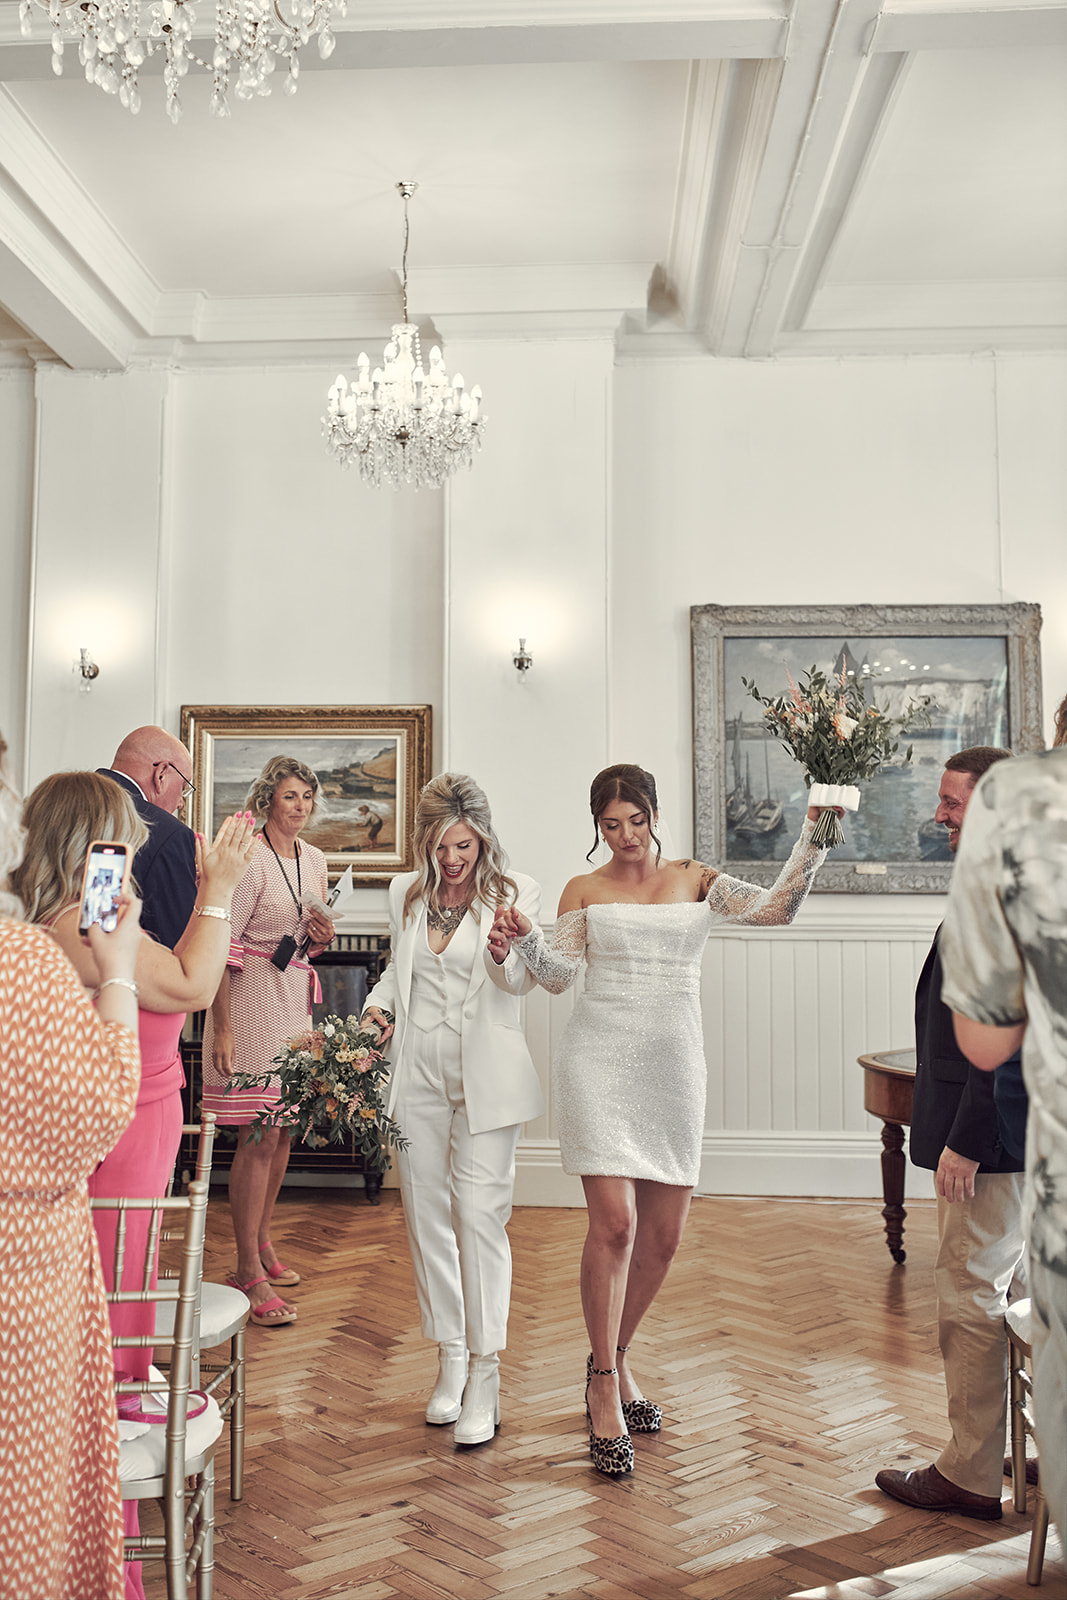 brides dancing their way out the room